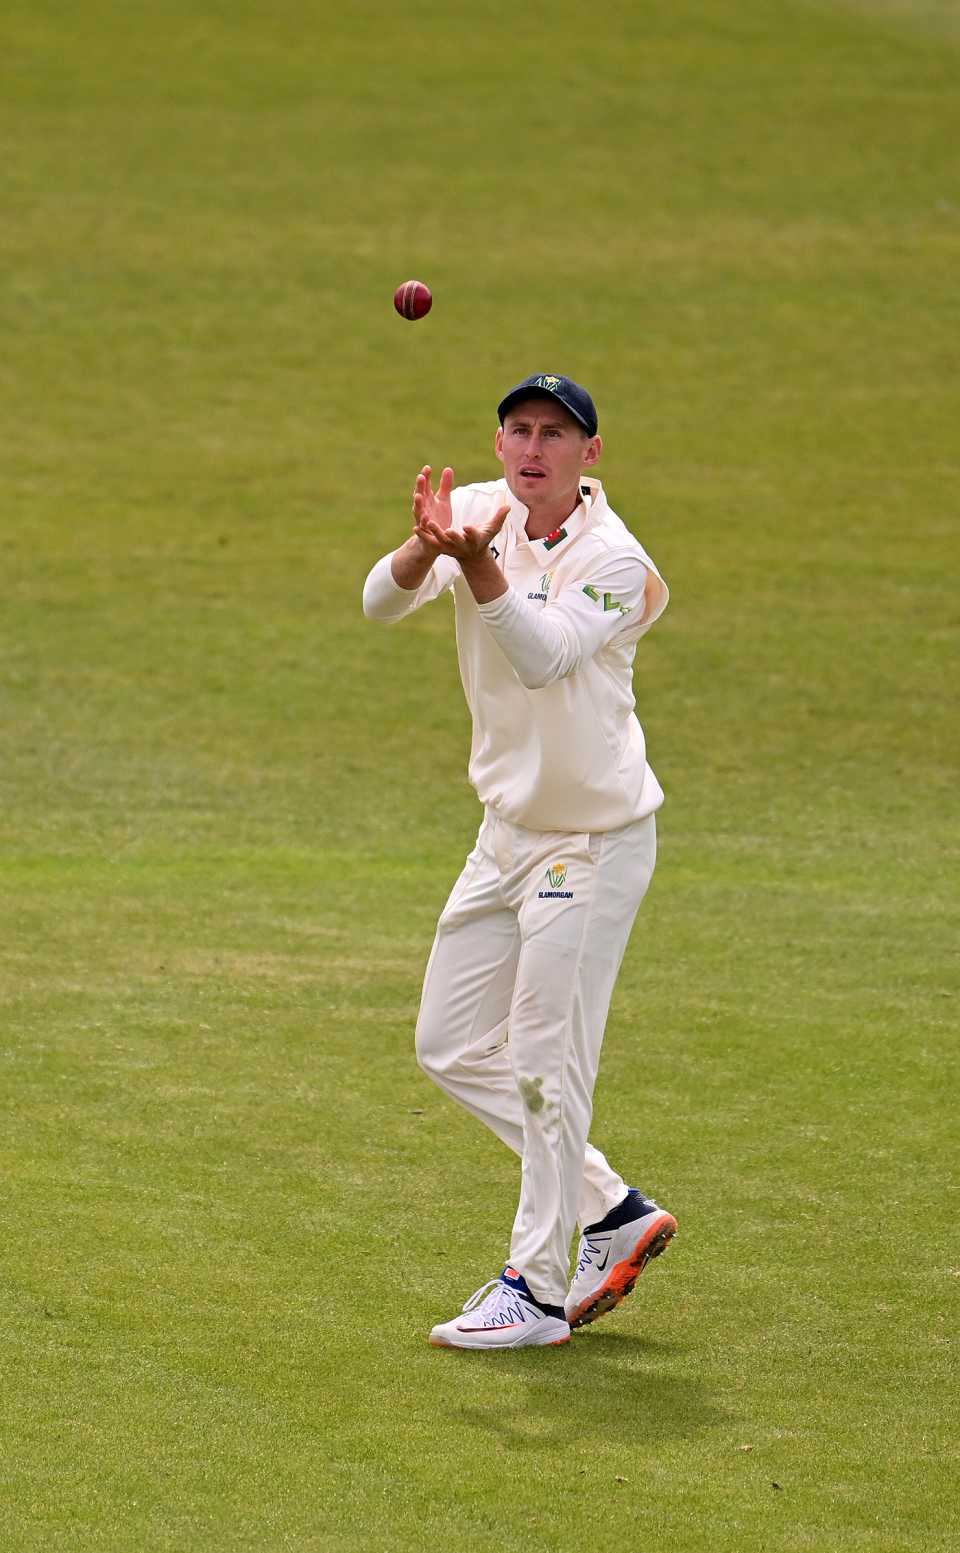 Marnus Labuschagne receives the ball in the field